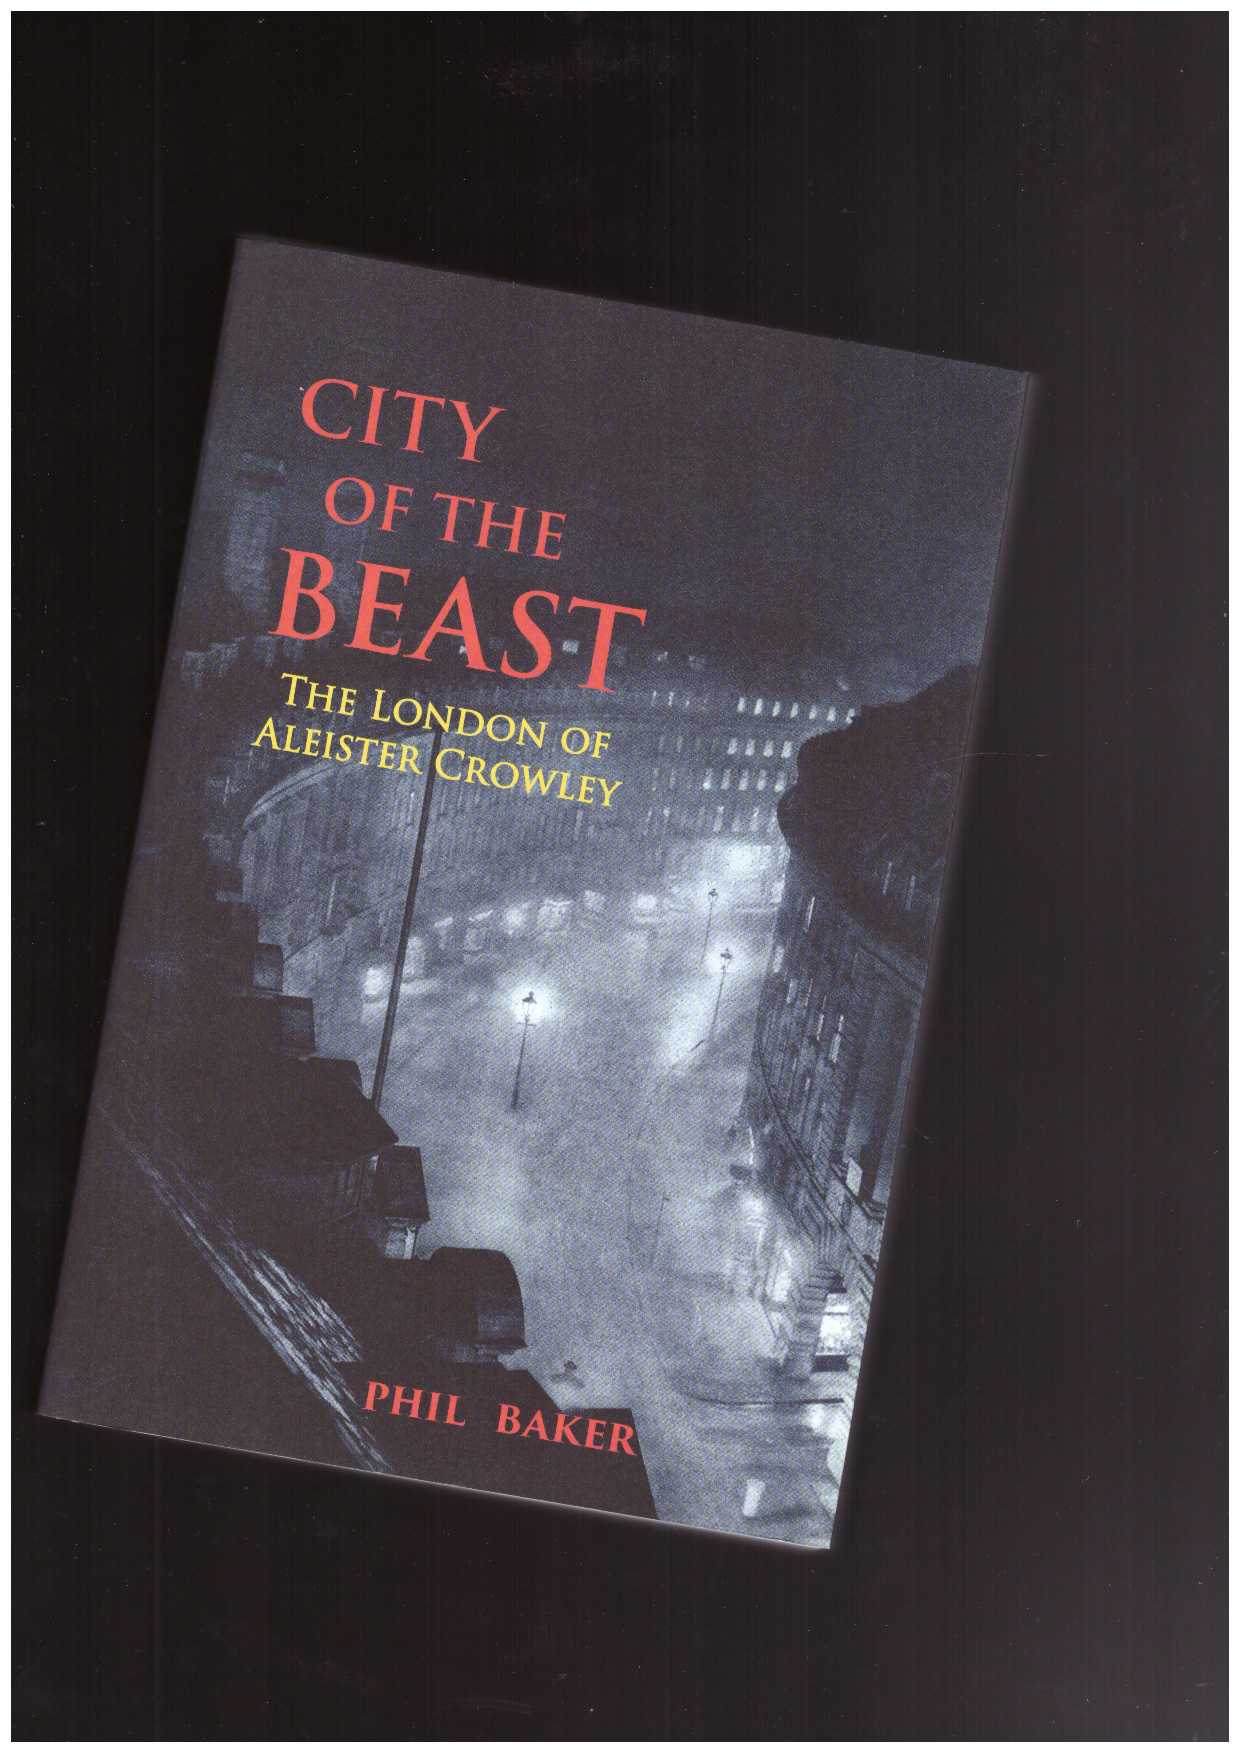 BAKER, Phil - City of the Beast: The London of Aleister Crowley